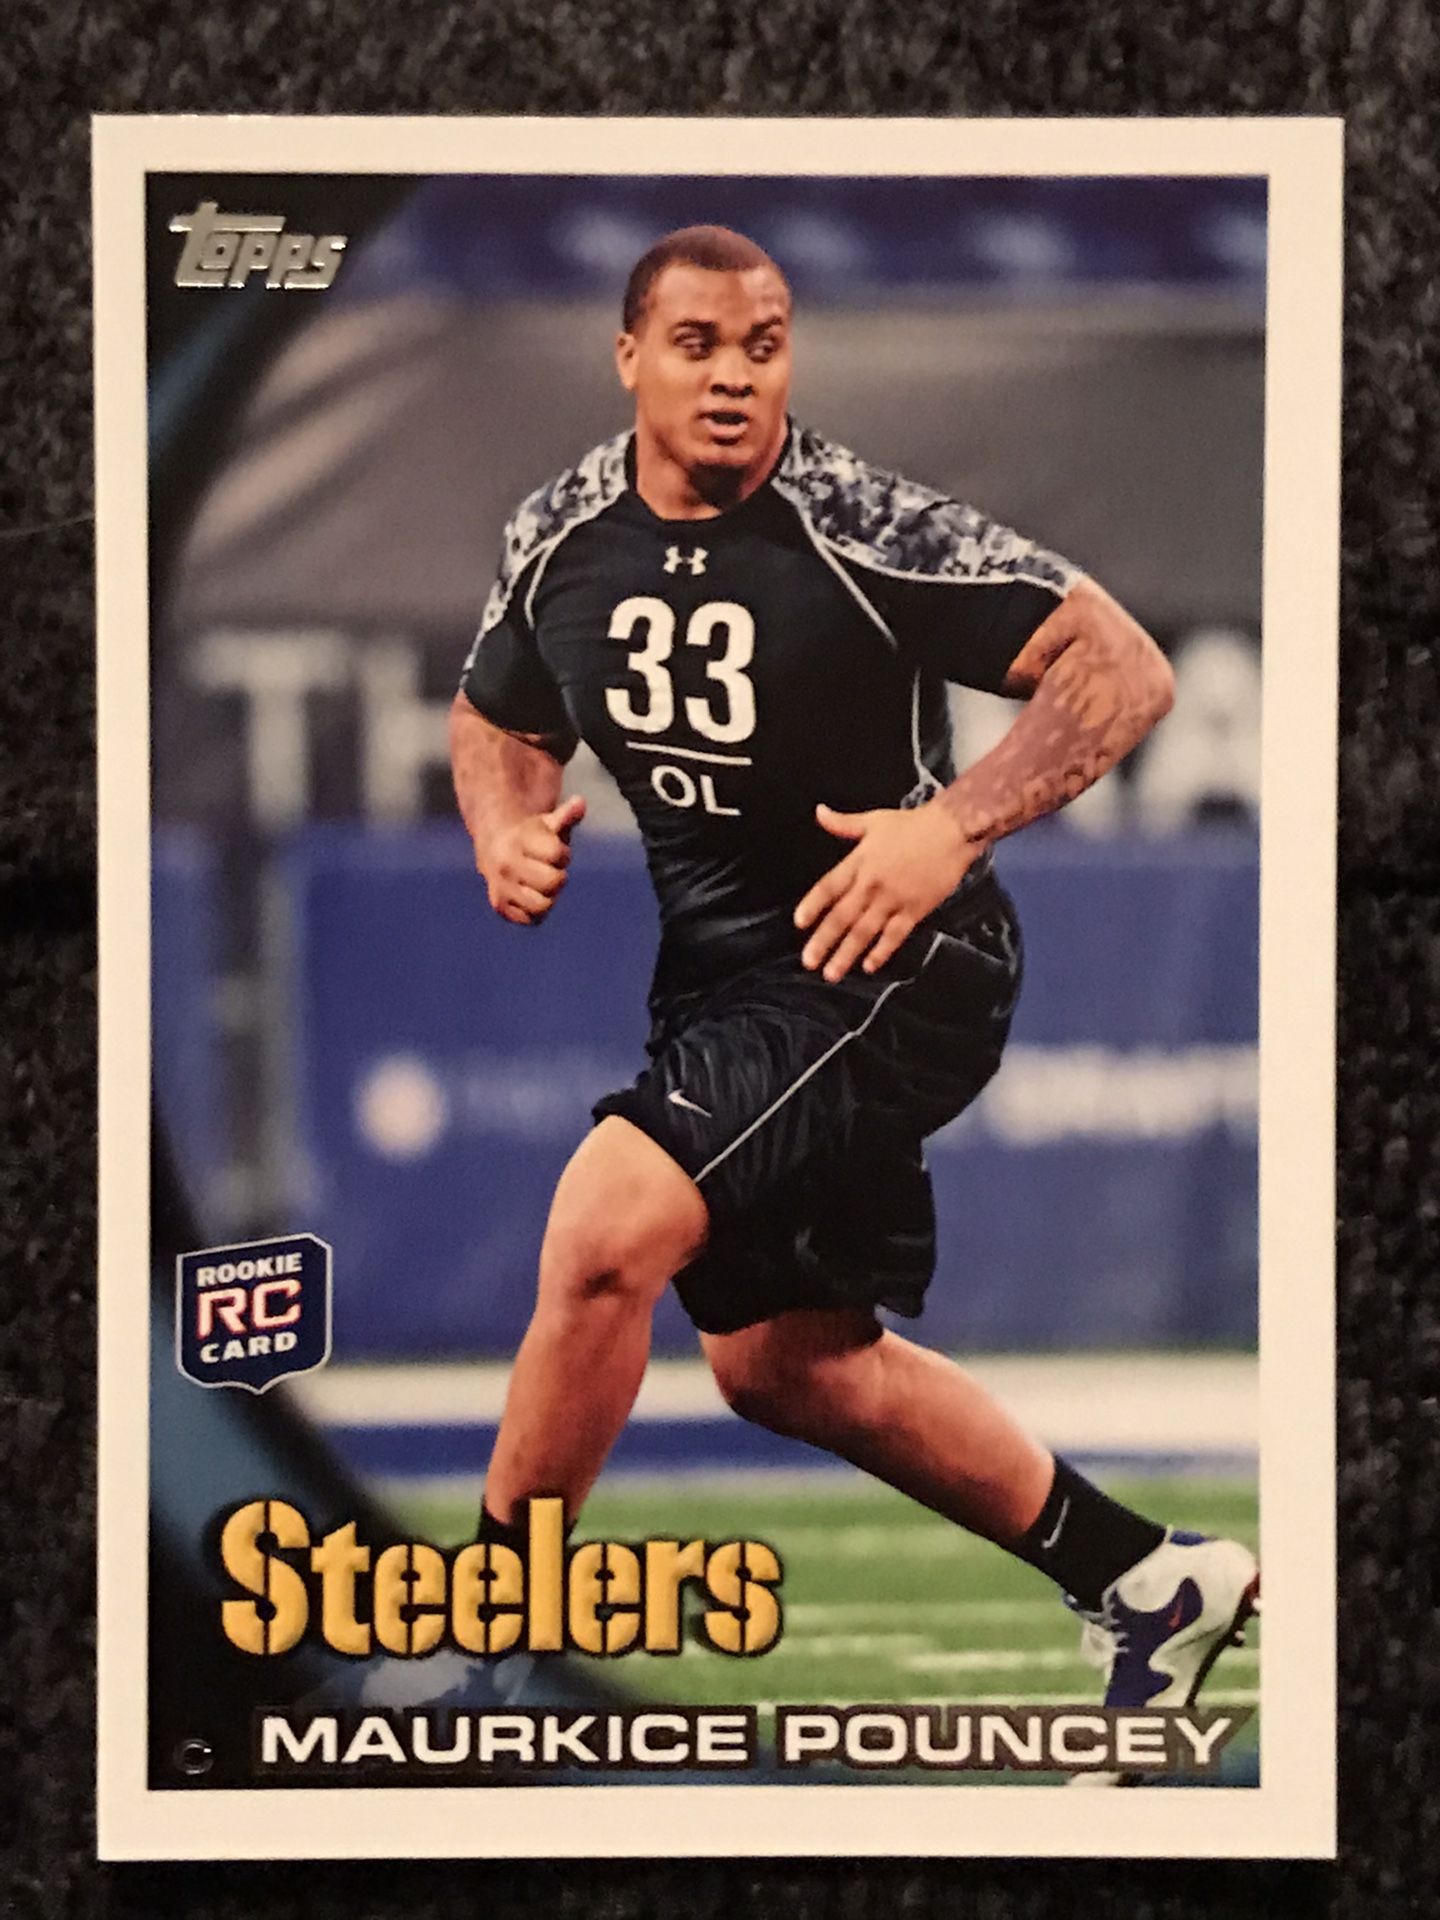 2010 topps maurkice pouncey rookie